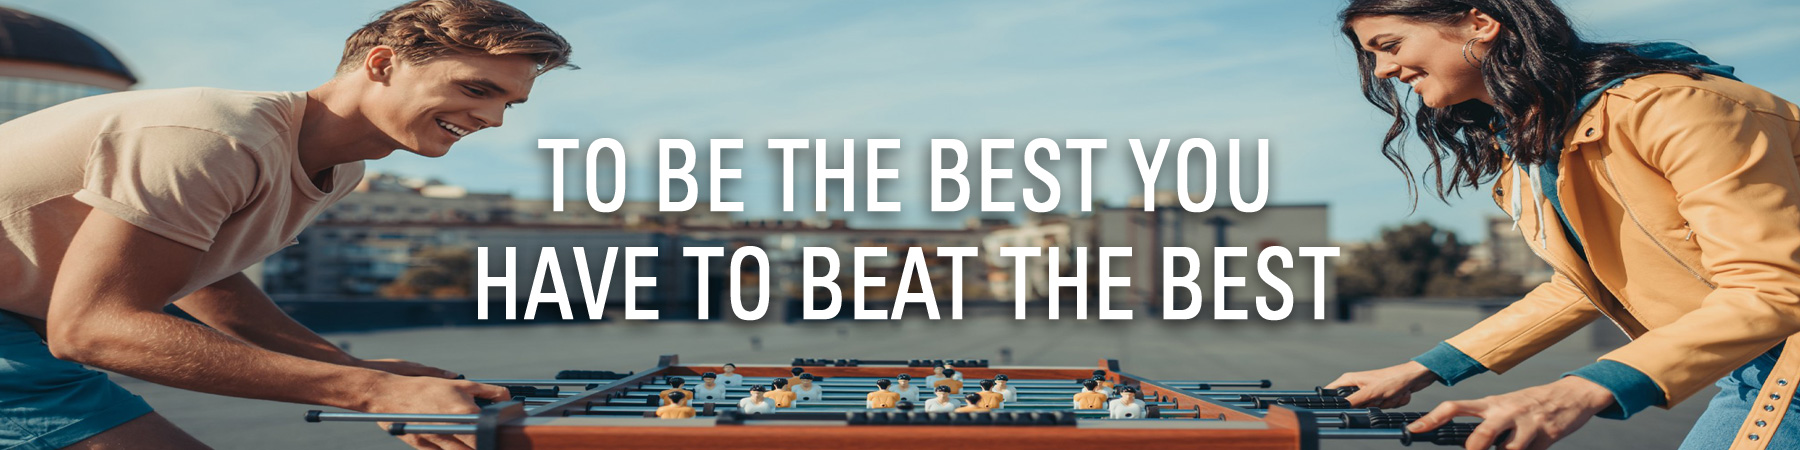 To Be The Best You Have to Beat The Best